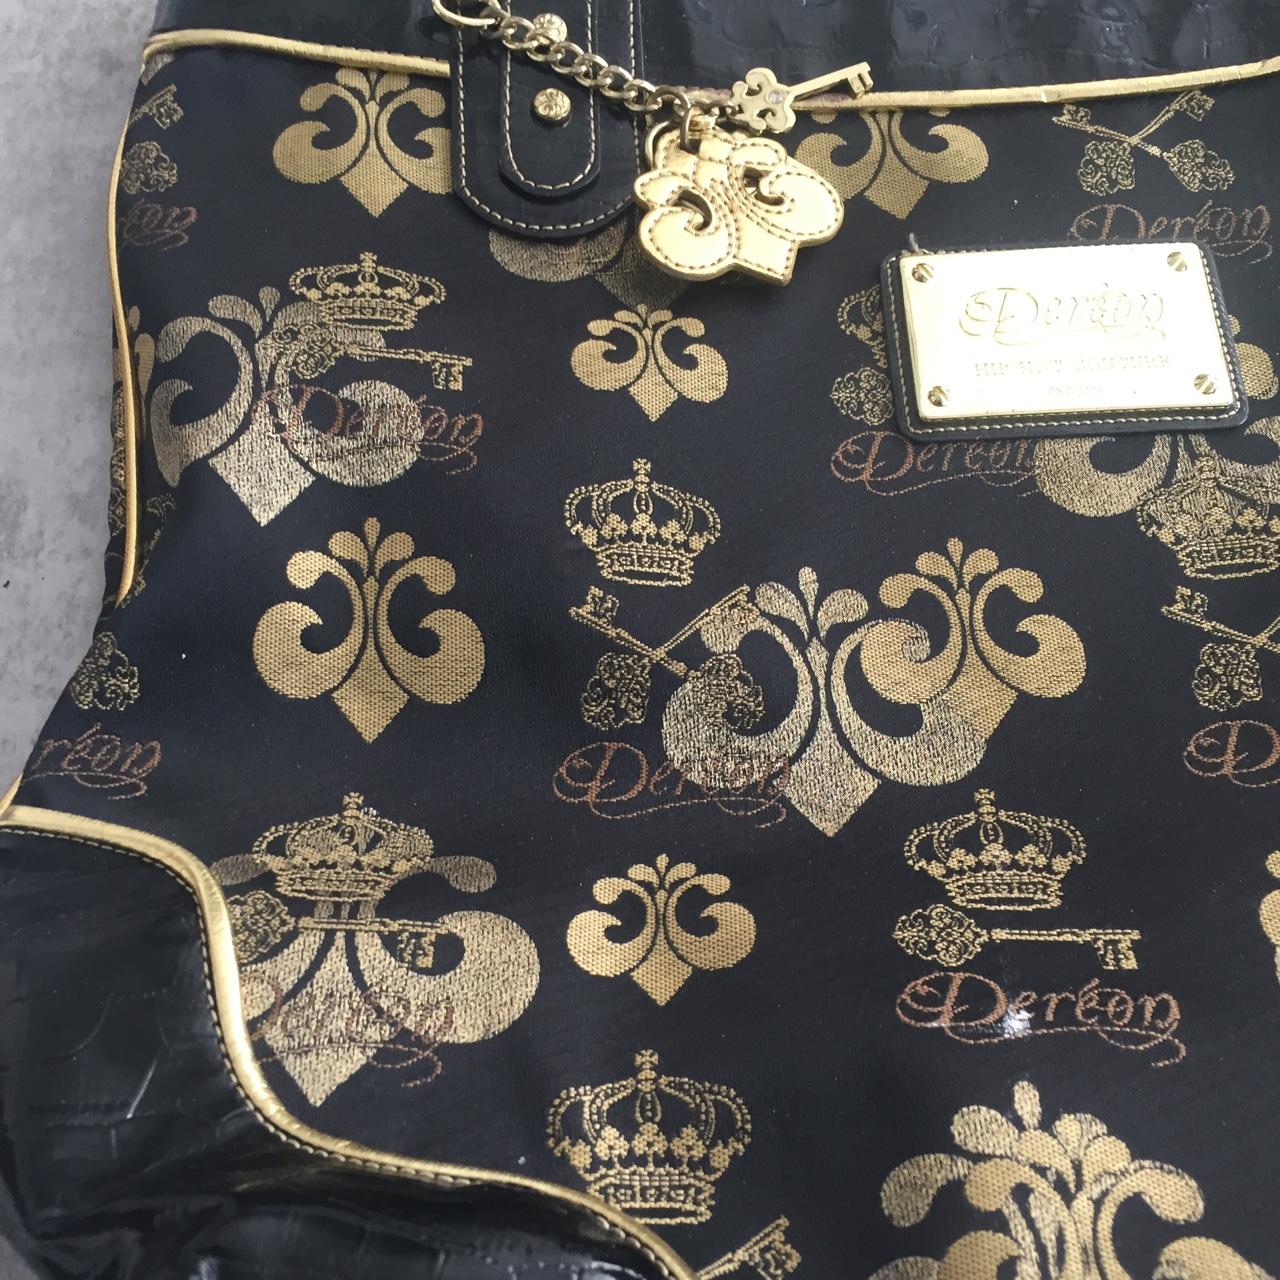 Best Dereon Purse Black And Gold for sale in Detroit, Michigan for 2023